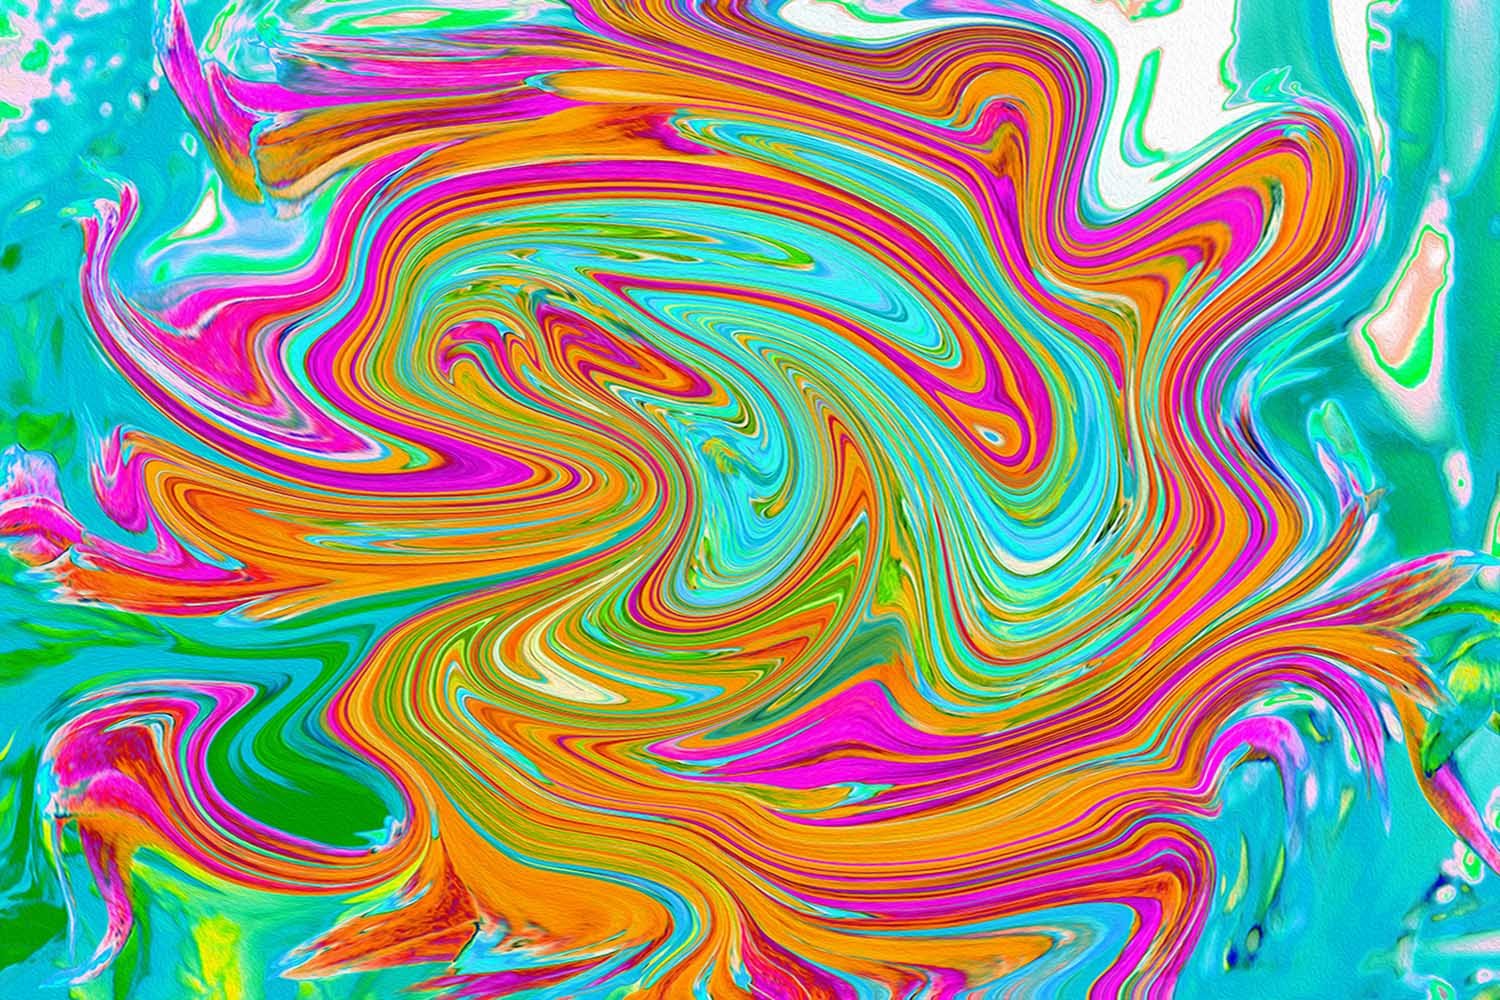 Blue, Orange and Hot Pink Groovy Abstract Retro Art